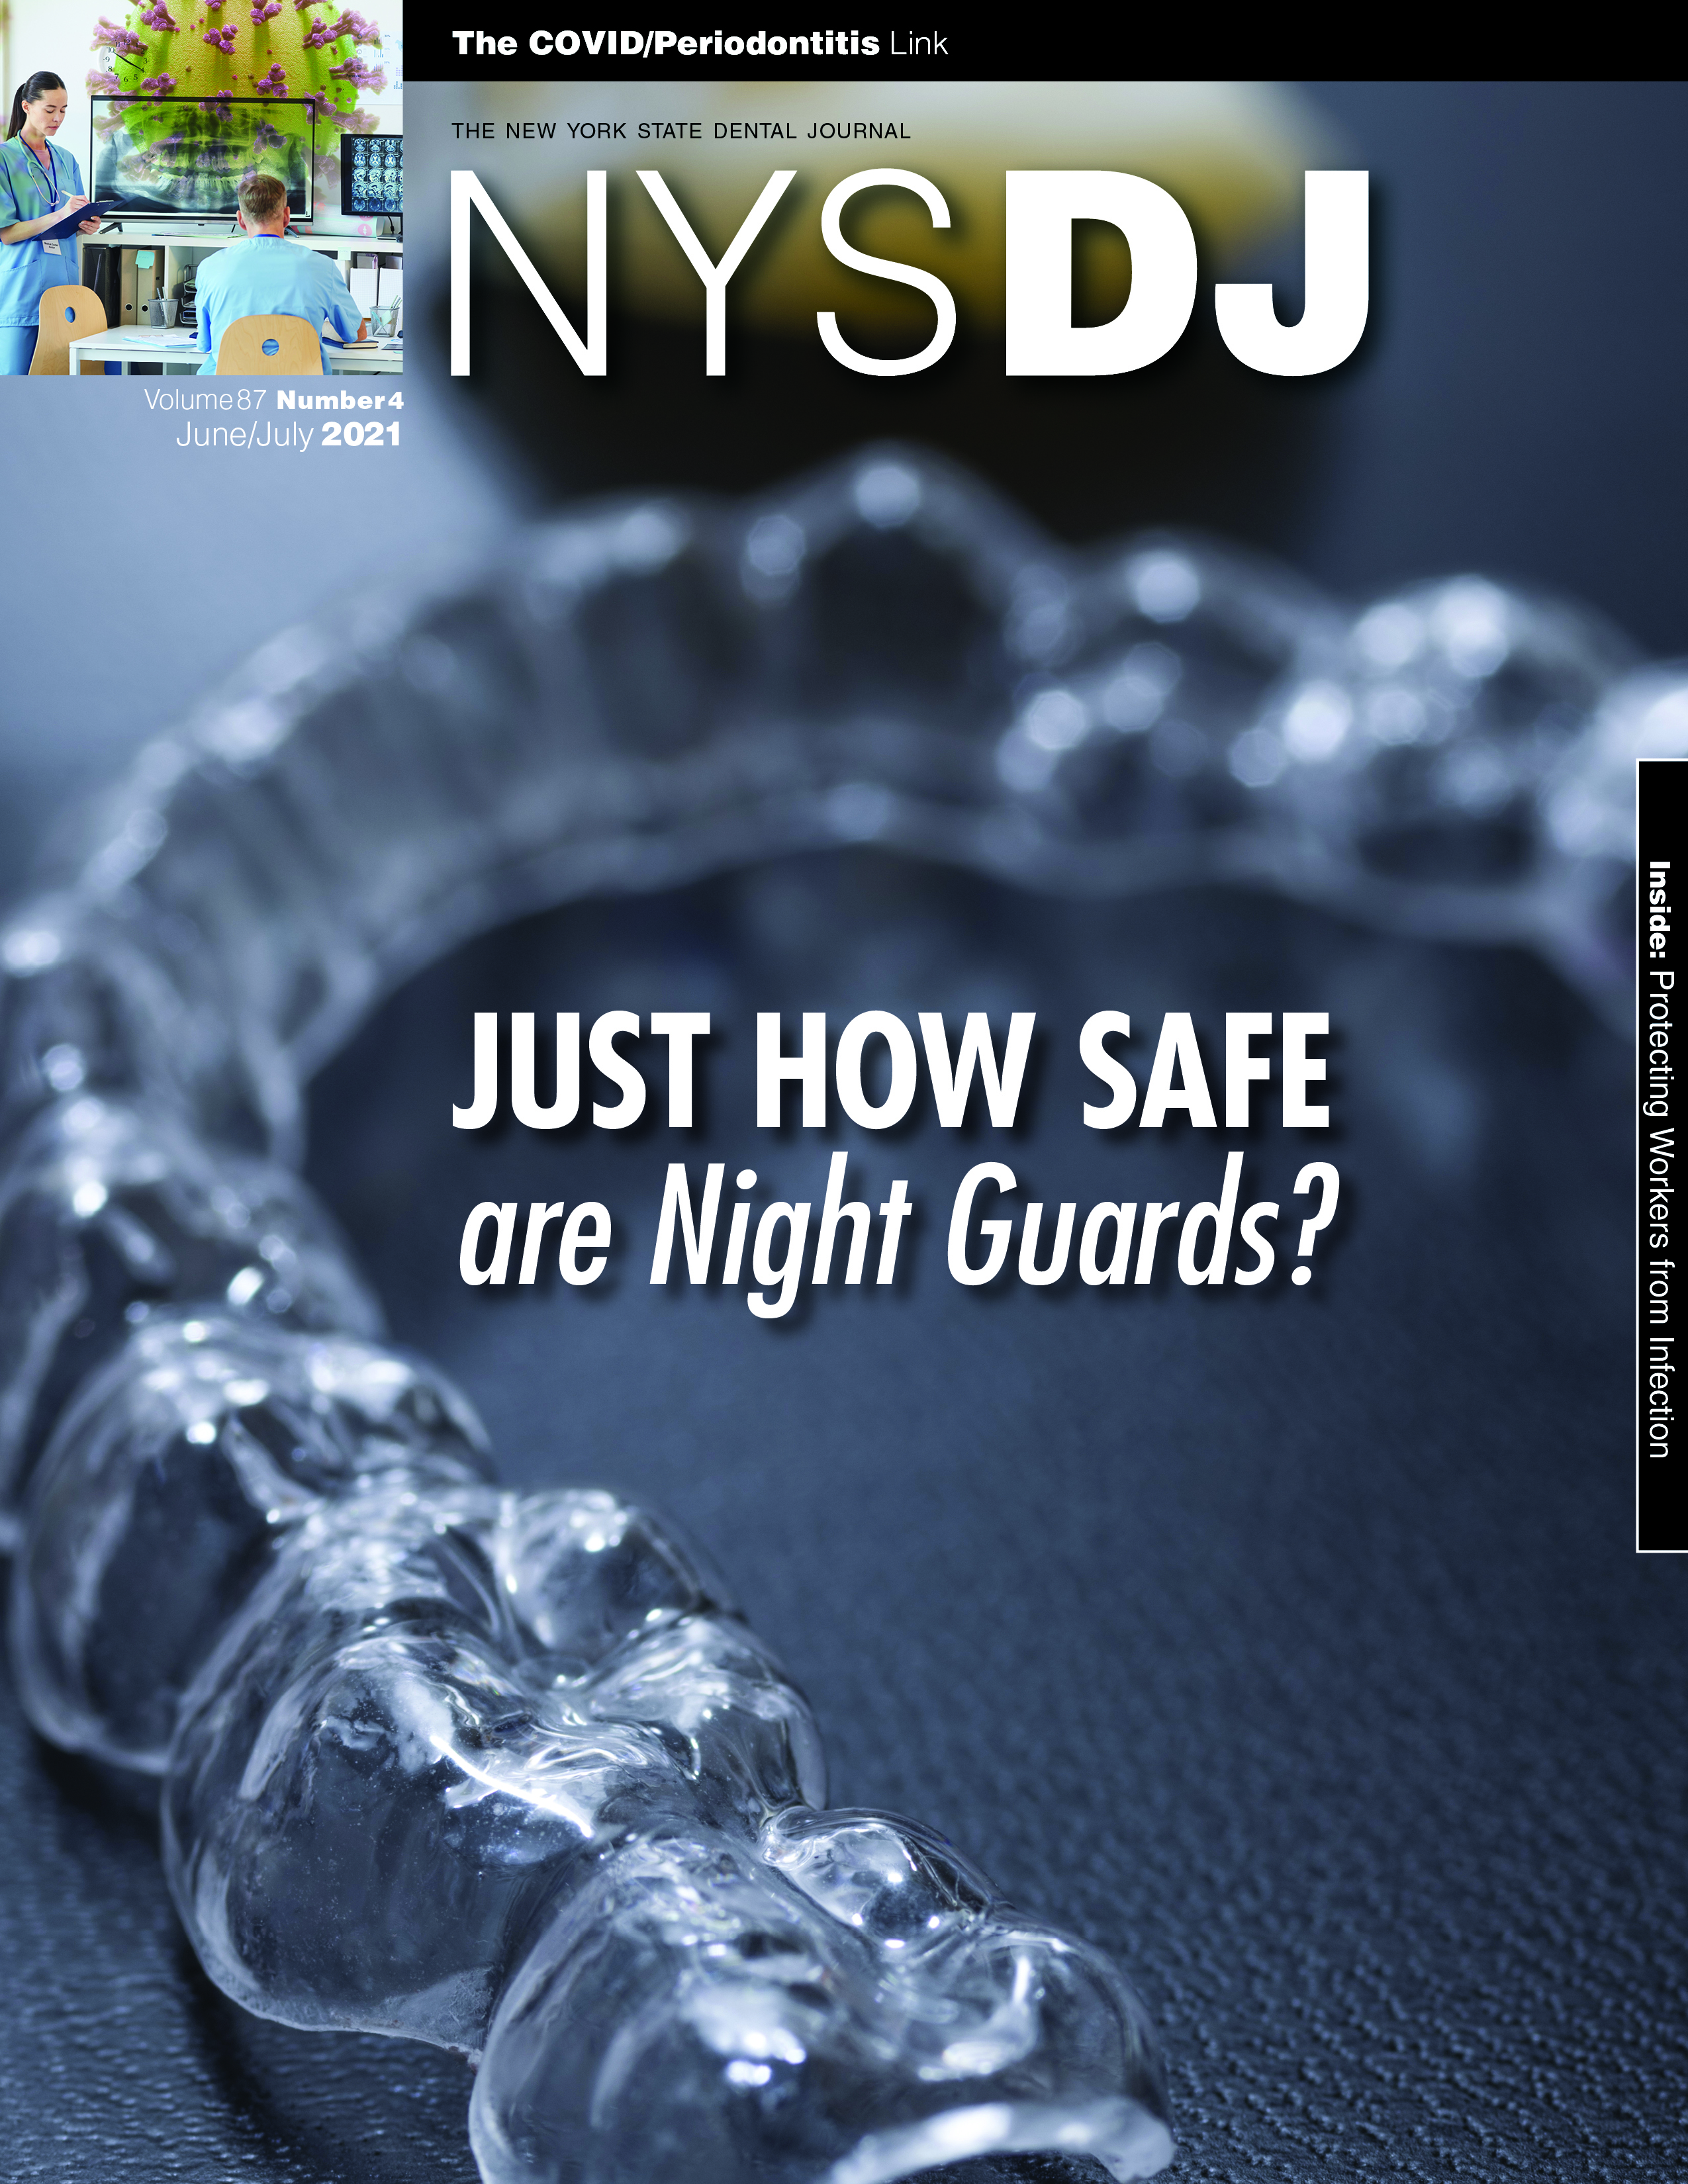 Cover of the NYSDJ with a close up photo of a night guard